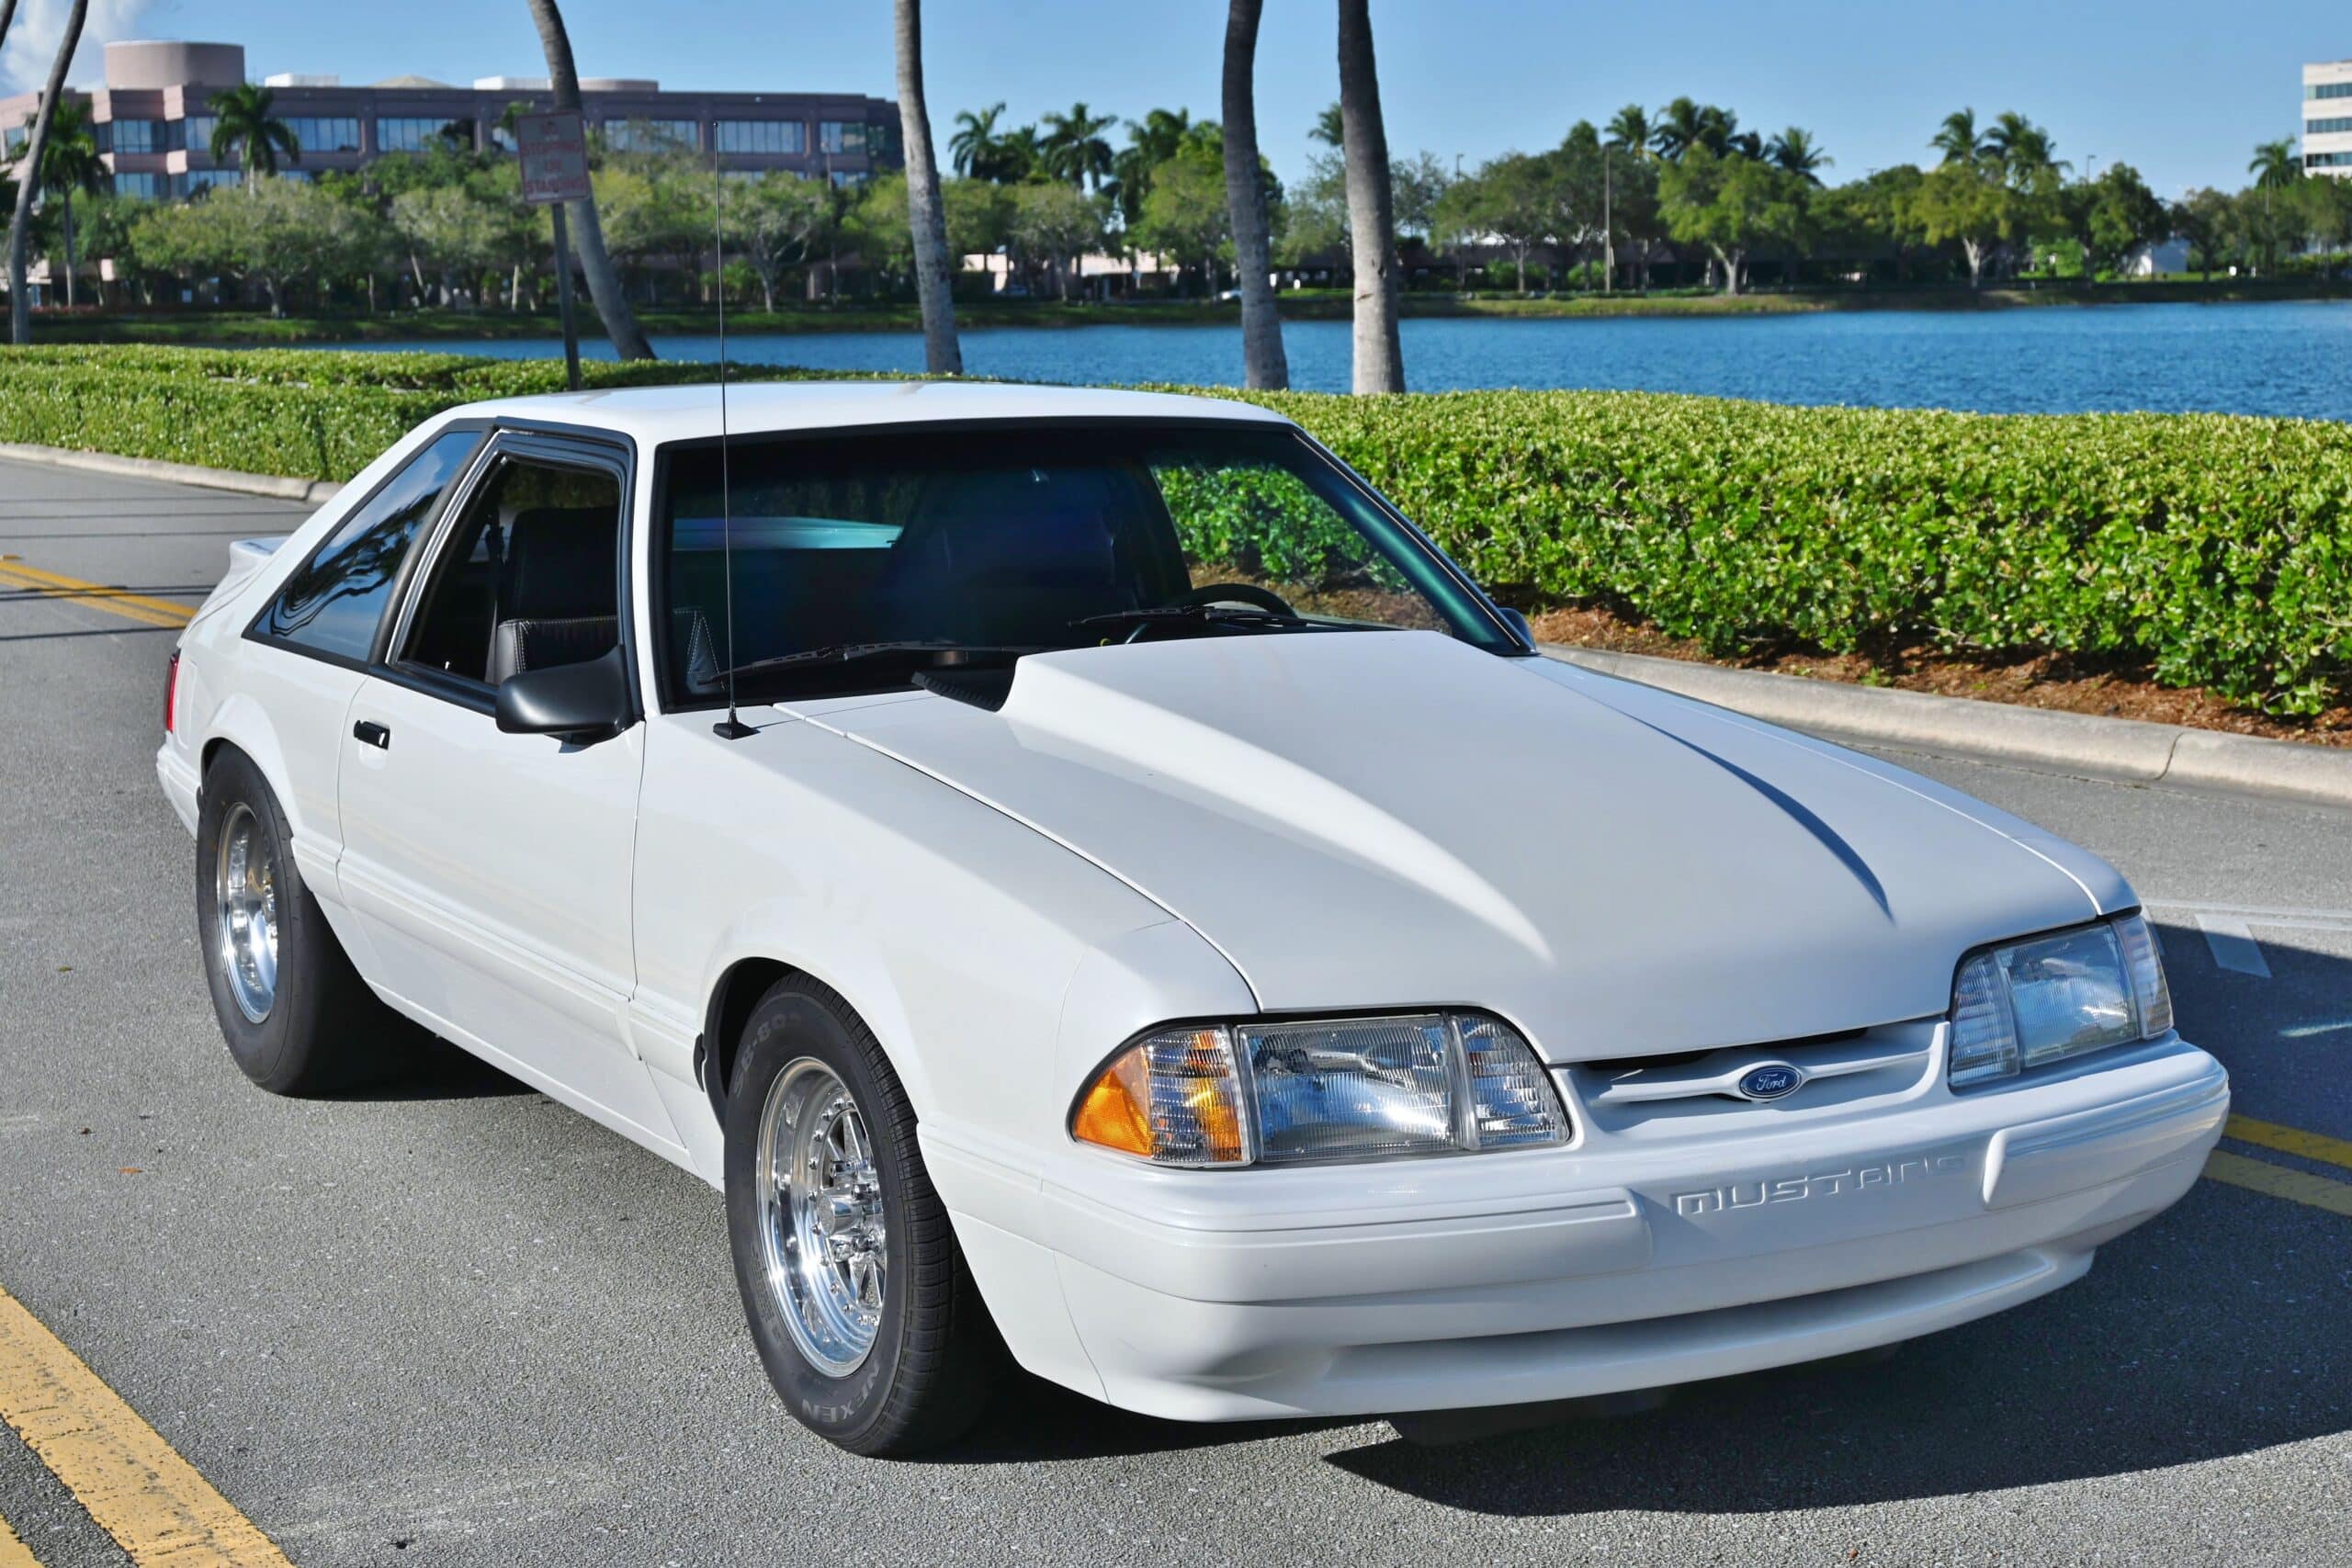 1991 Ford Mustang LX 5.0 Street/Strip 361 CI V8 Dart Block – 500HP – T5 Clutch less trans – COLD AC Over $50,000 invested